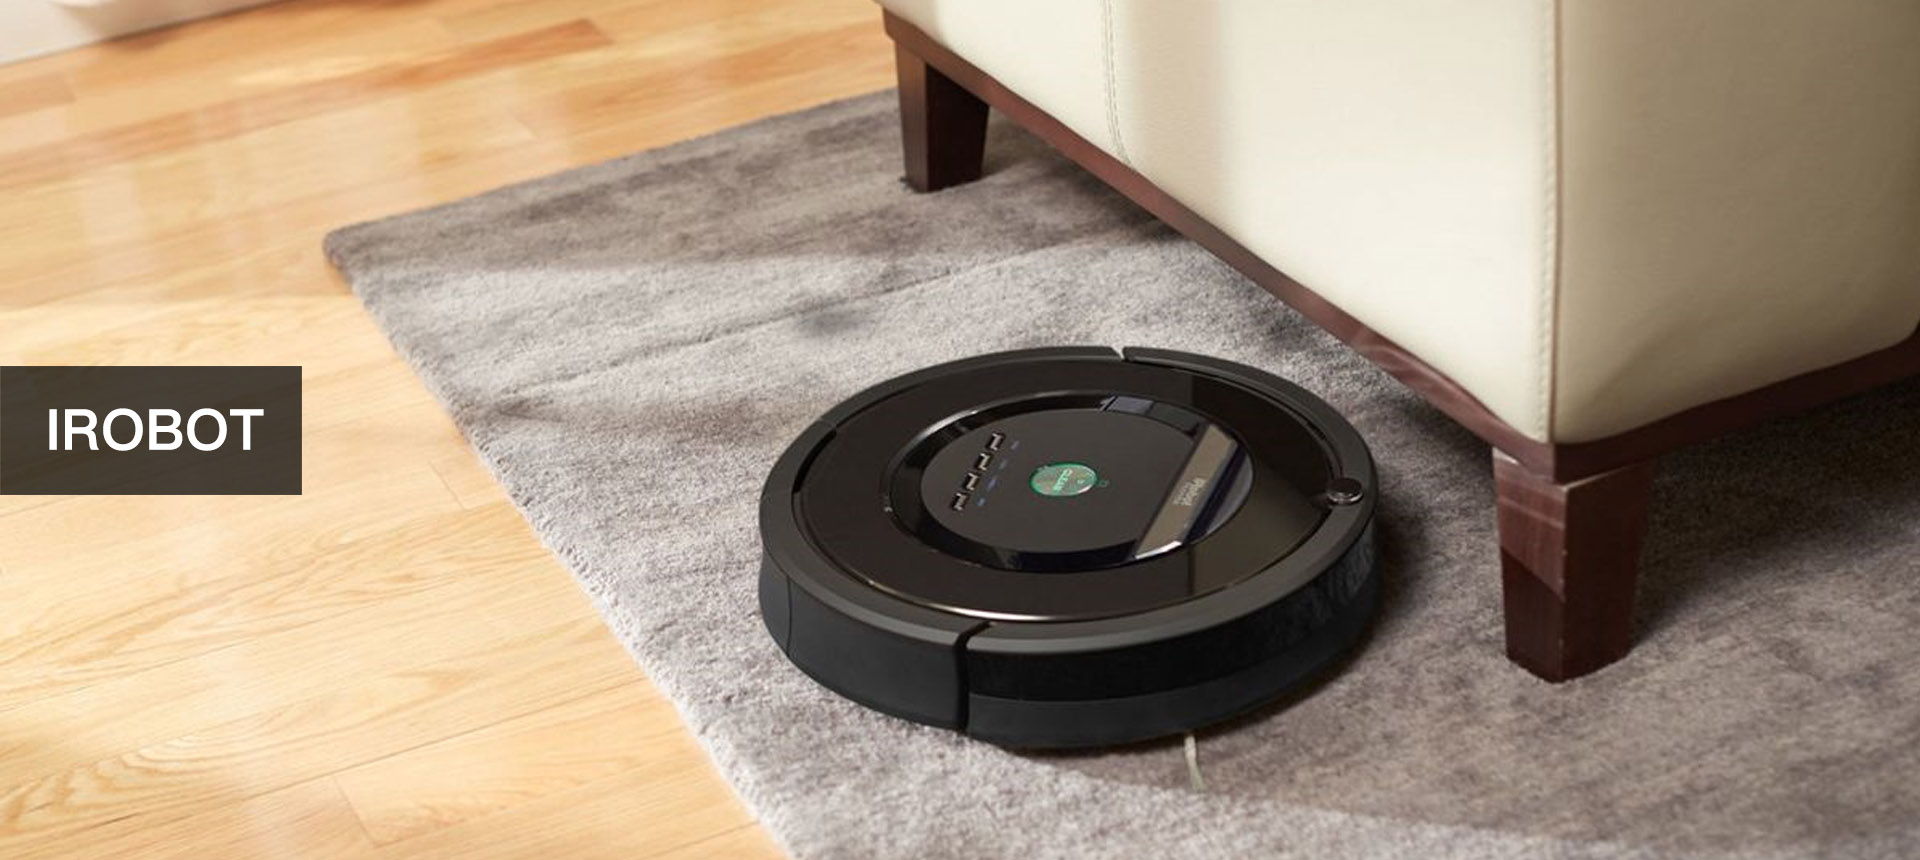 Pet Hair Allergies Grey Hardwood Tile Floor Sweeping Robot-90 Minutes Running Time and Self-Route Navigation-Robot Self-Detection of Stairs Carpet Robot Household Cleaning 